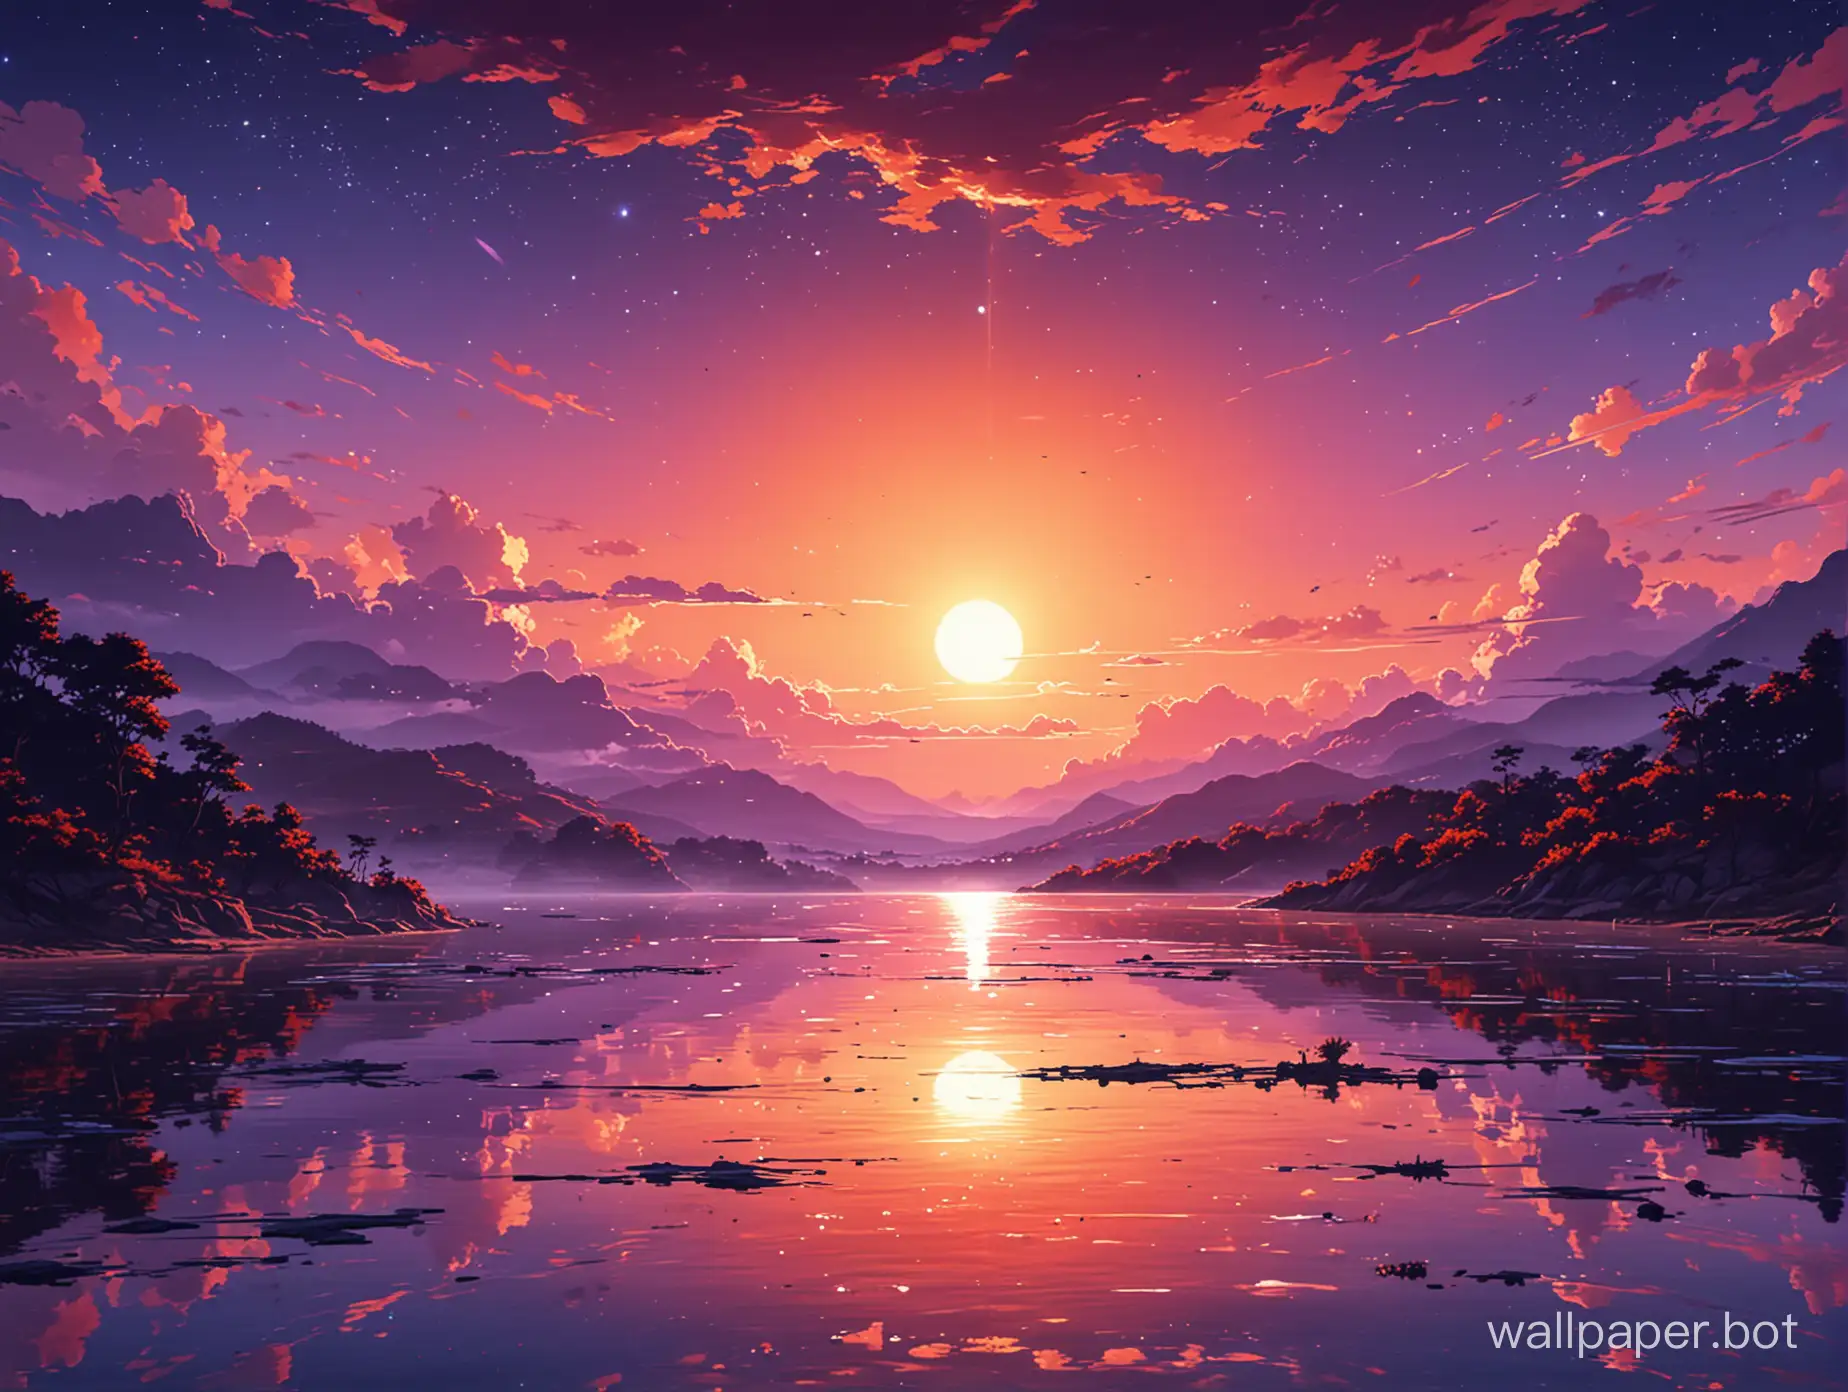 make me an 1920x1080p wallpaper, anime style landscape, contrasting colours red orange blue purple, sun setting in the middle, beautiful water body, make the sky dark, stars in the sky